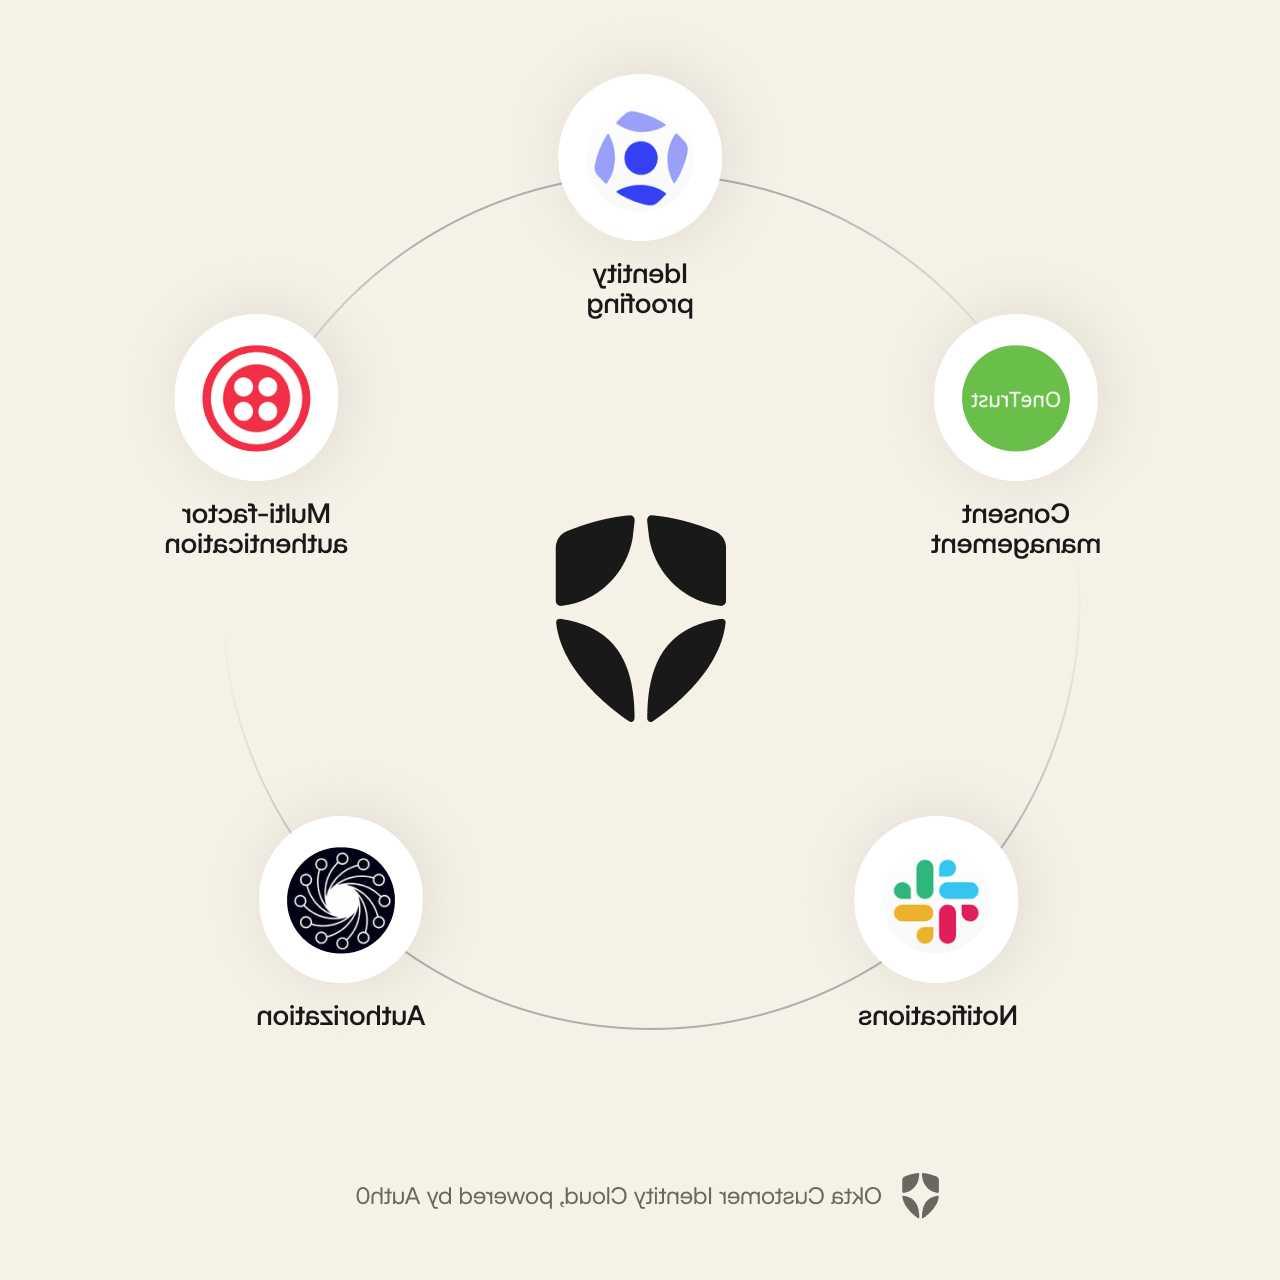 A shield icon is encircled by logos with the different types of authentication options